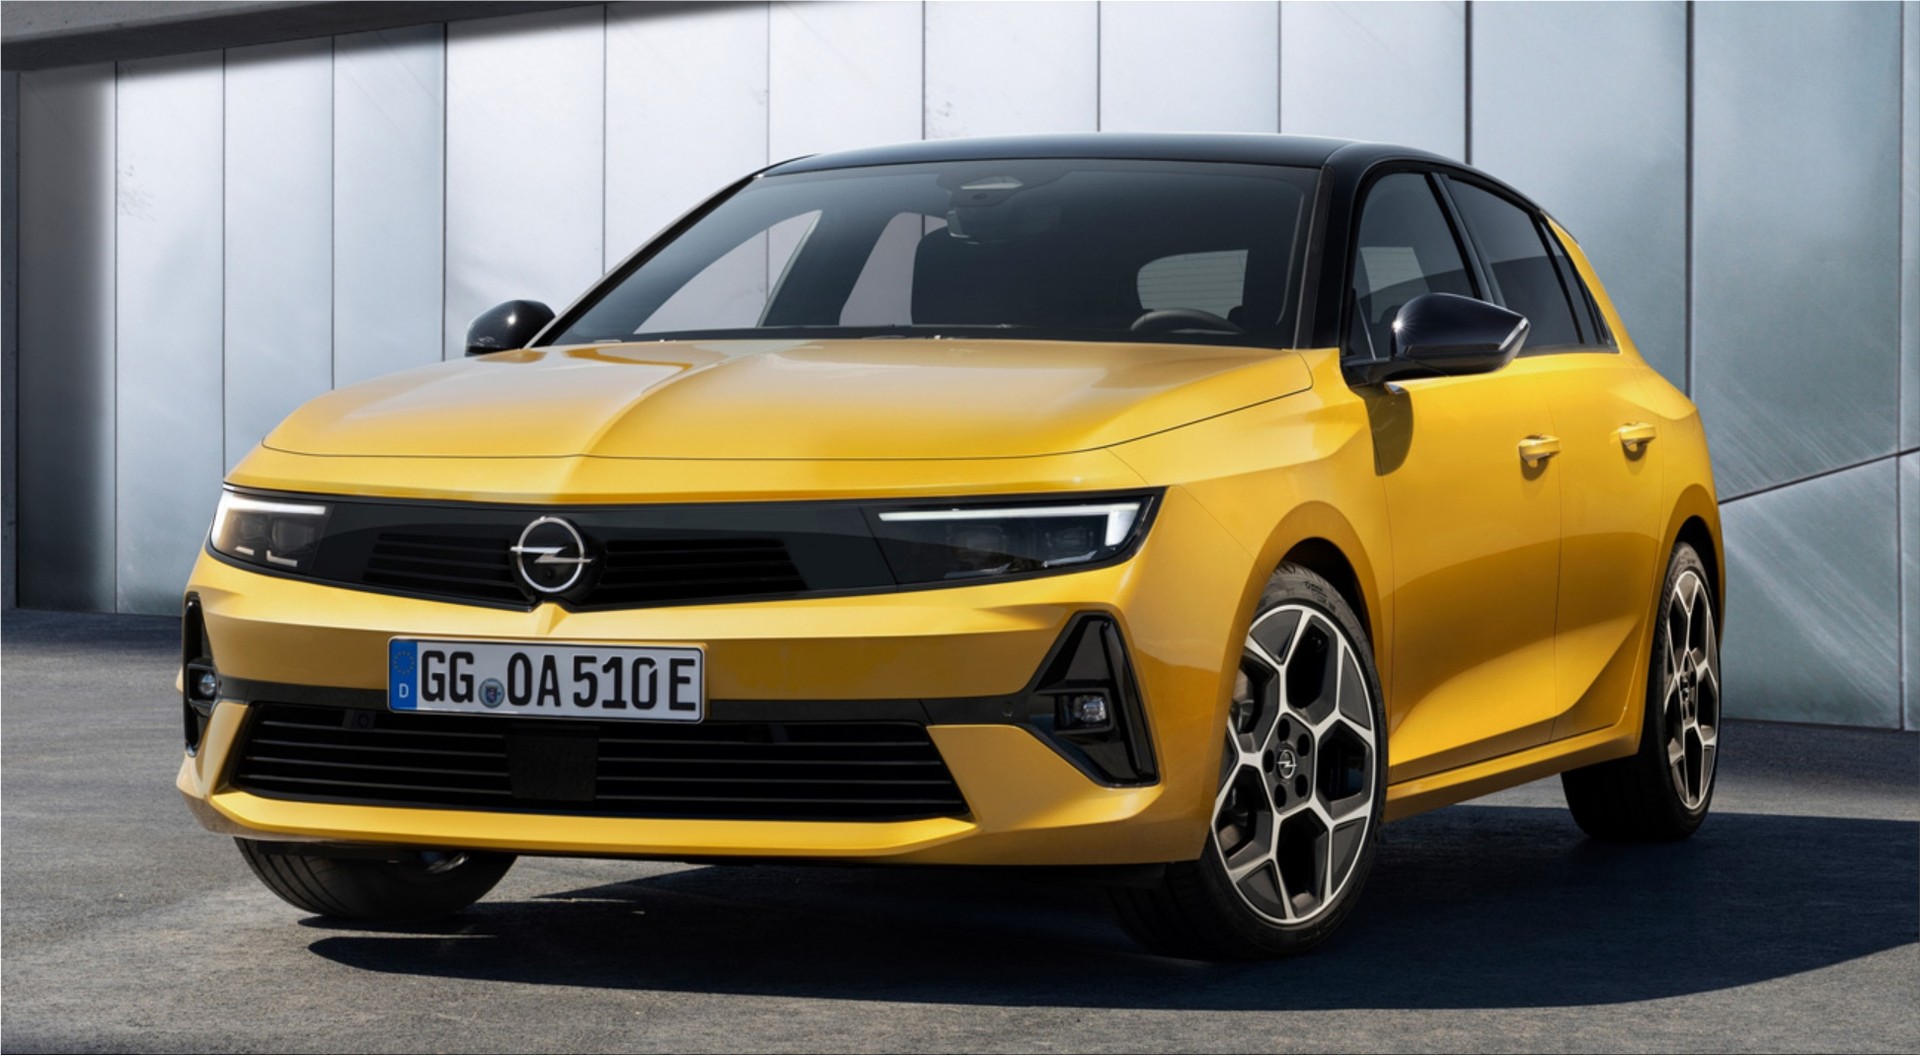 The Opel Astra electric car will be available from 2023